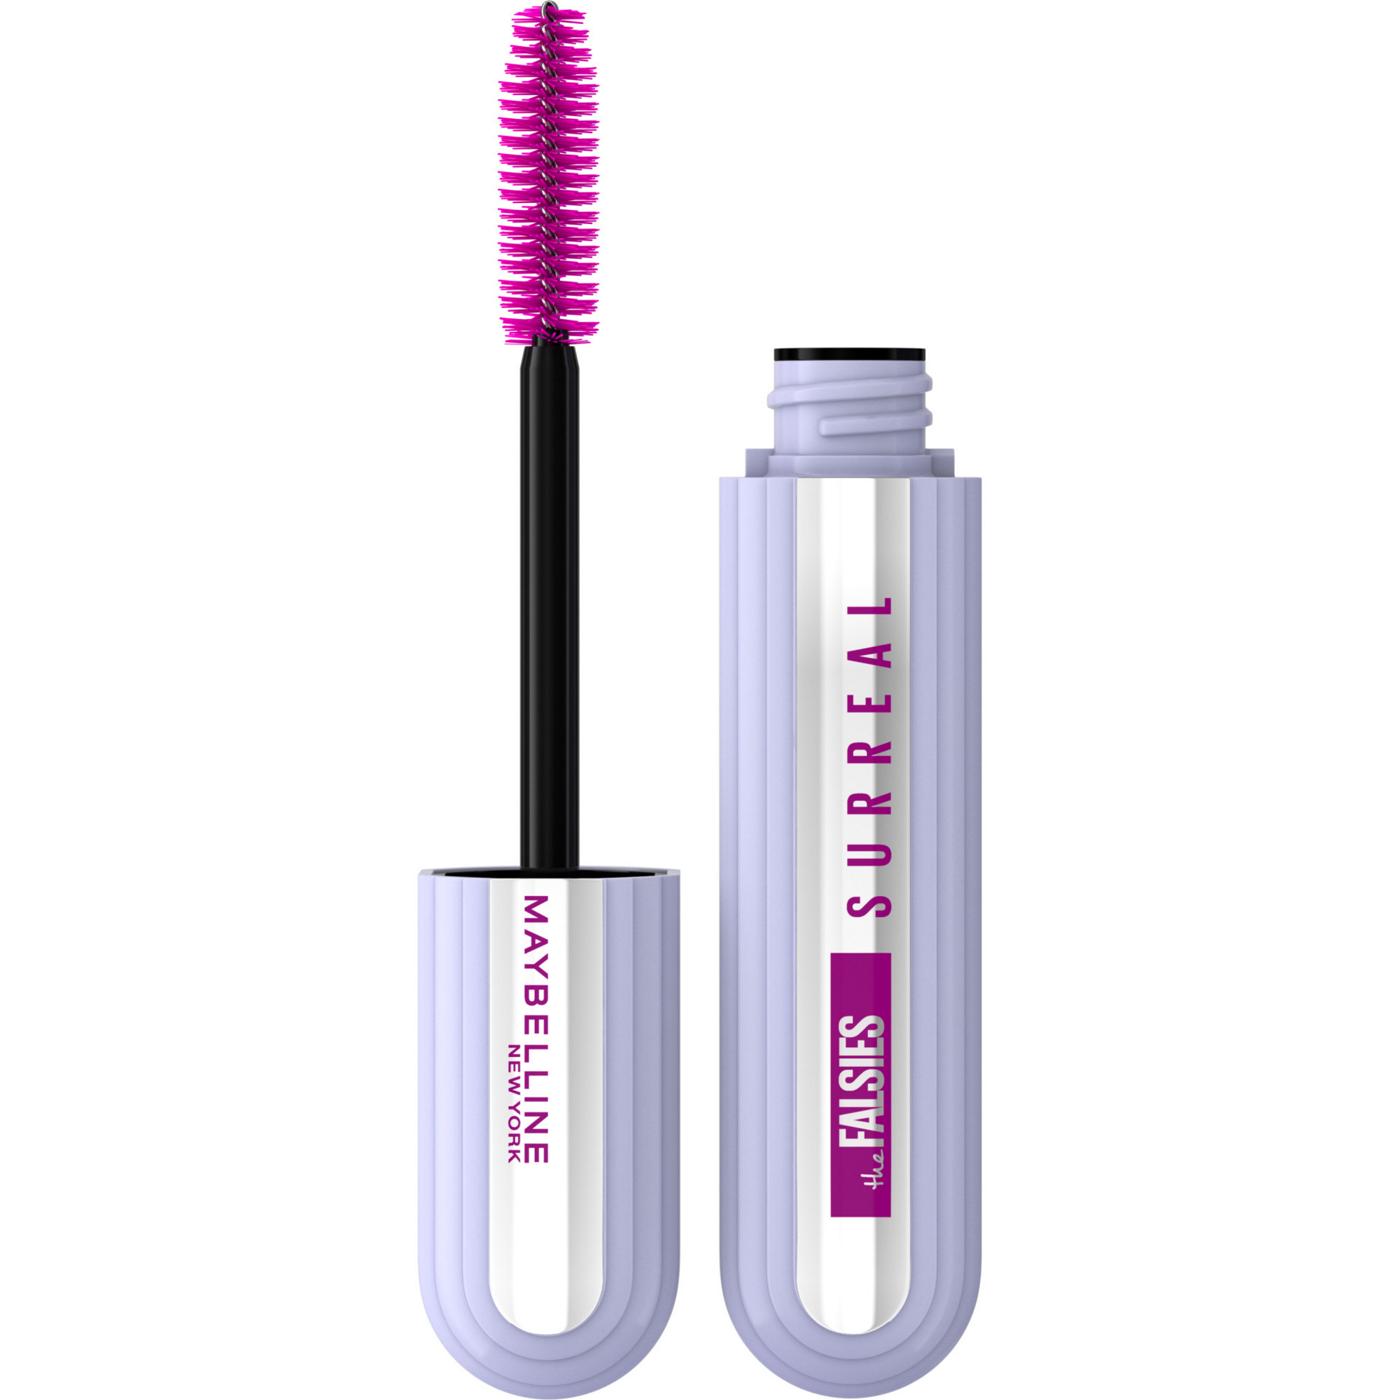 Maybelline The Falsies Surreal Mascara  - Very Black; image 3 of 3